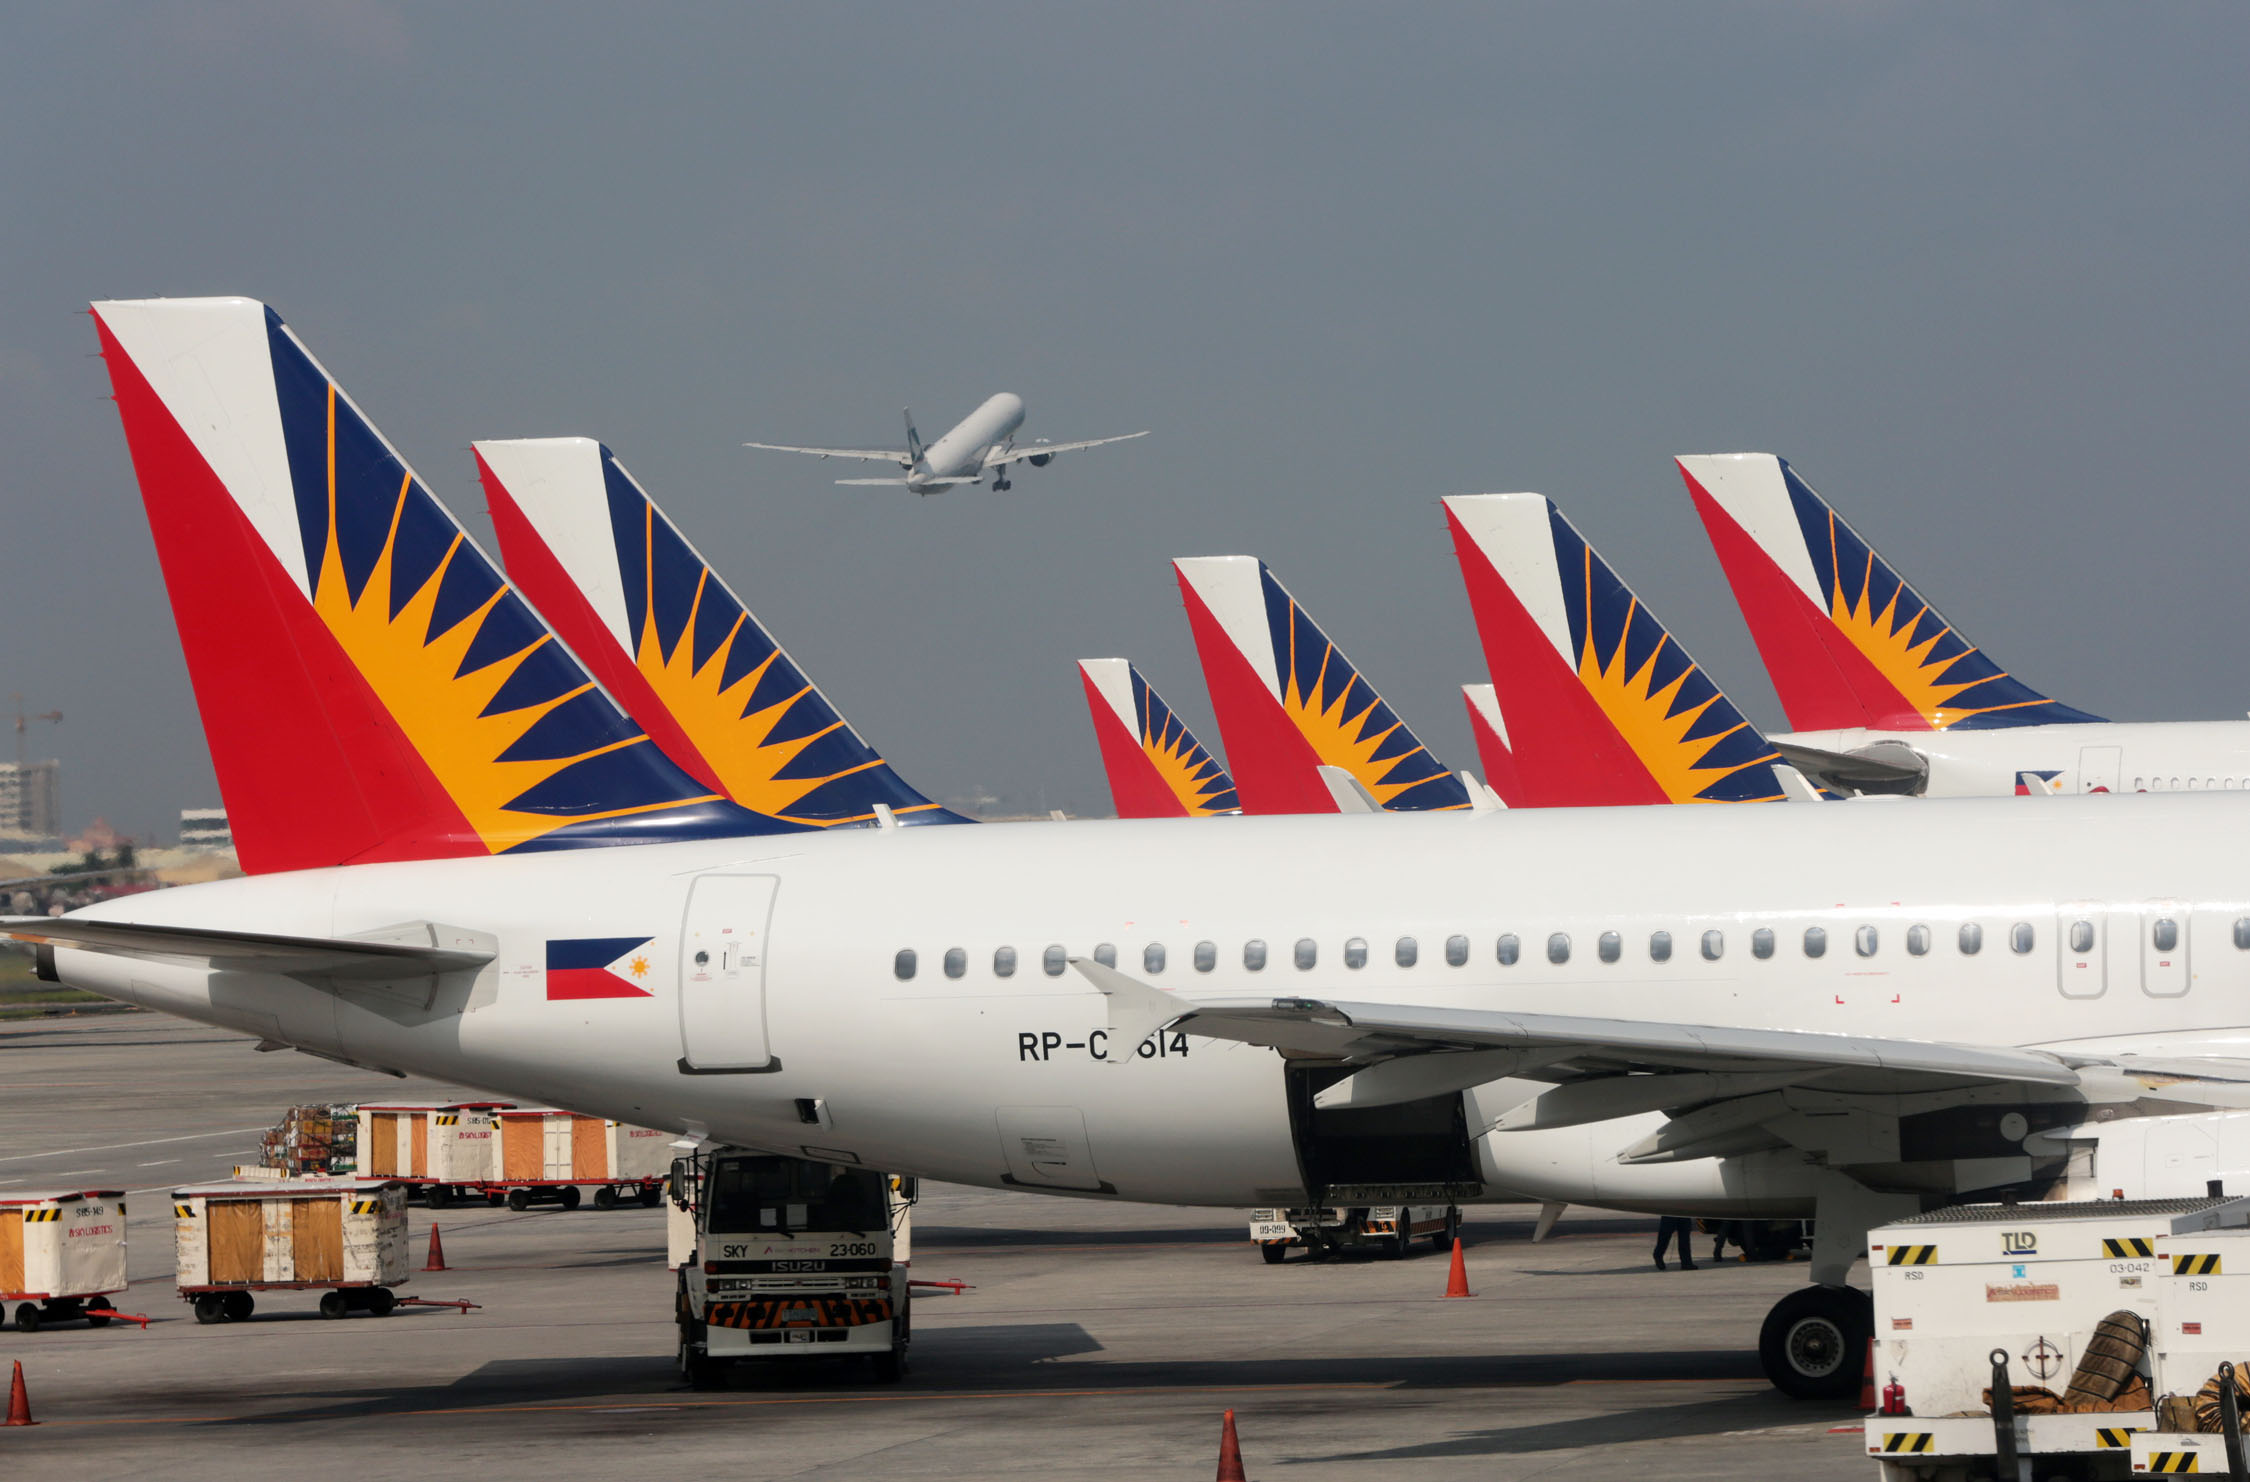 File photo of the Philippine Airlines planes at the NAIA Terminal 2. INQUIRER PHOTO / GRIG C. MONTEGRANDE